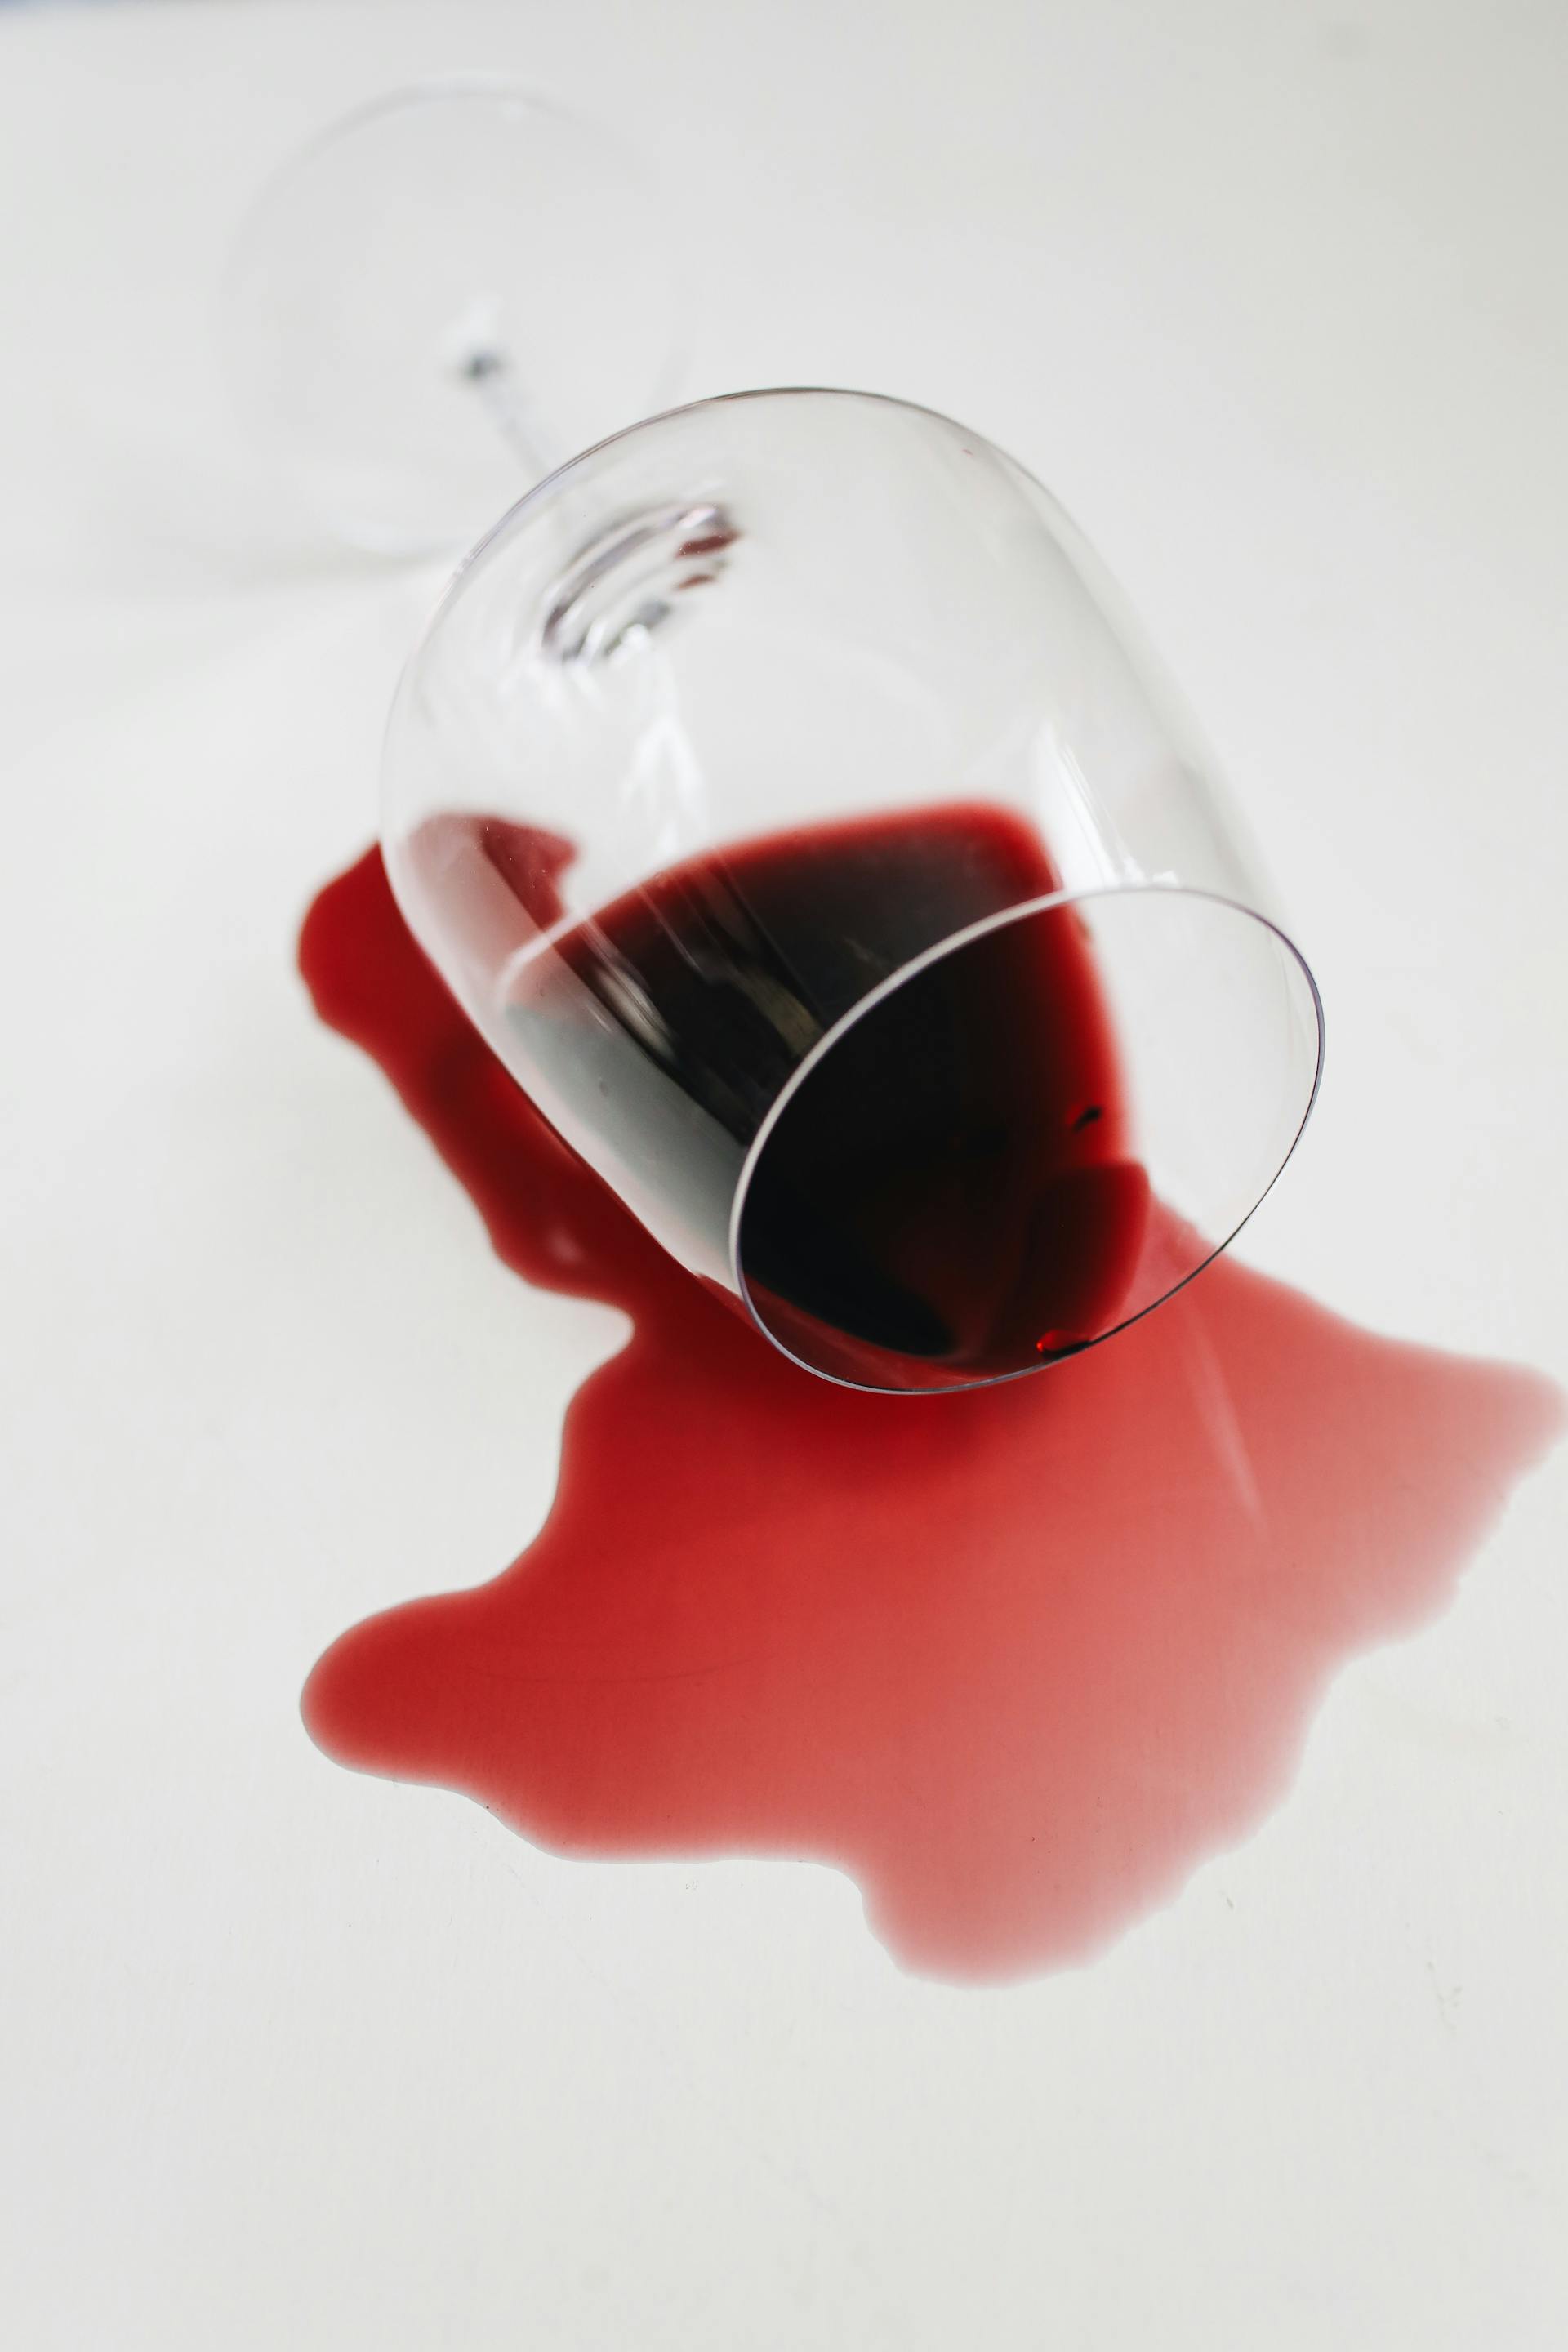 Spilled red wine from a glass | Source: Pexels